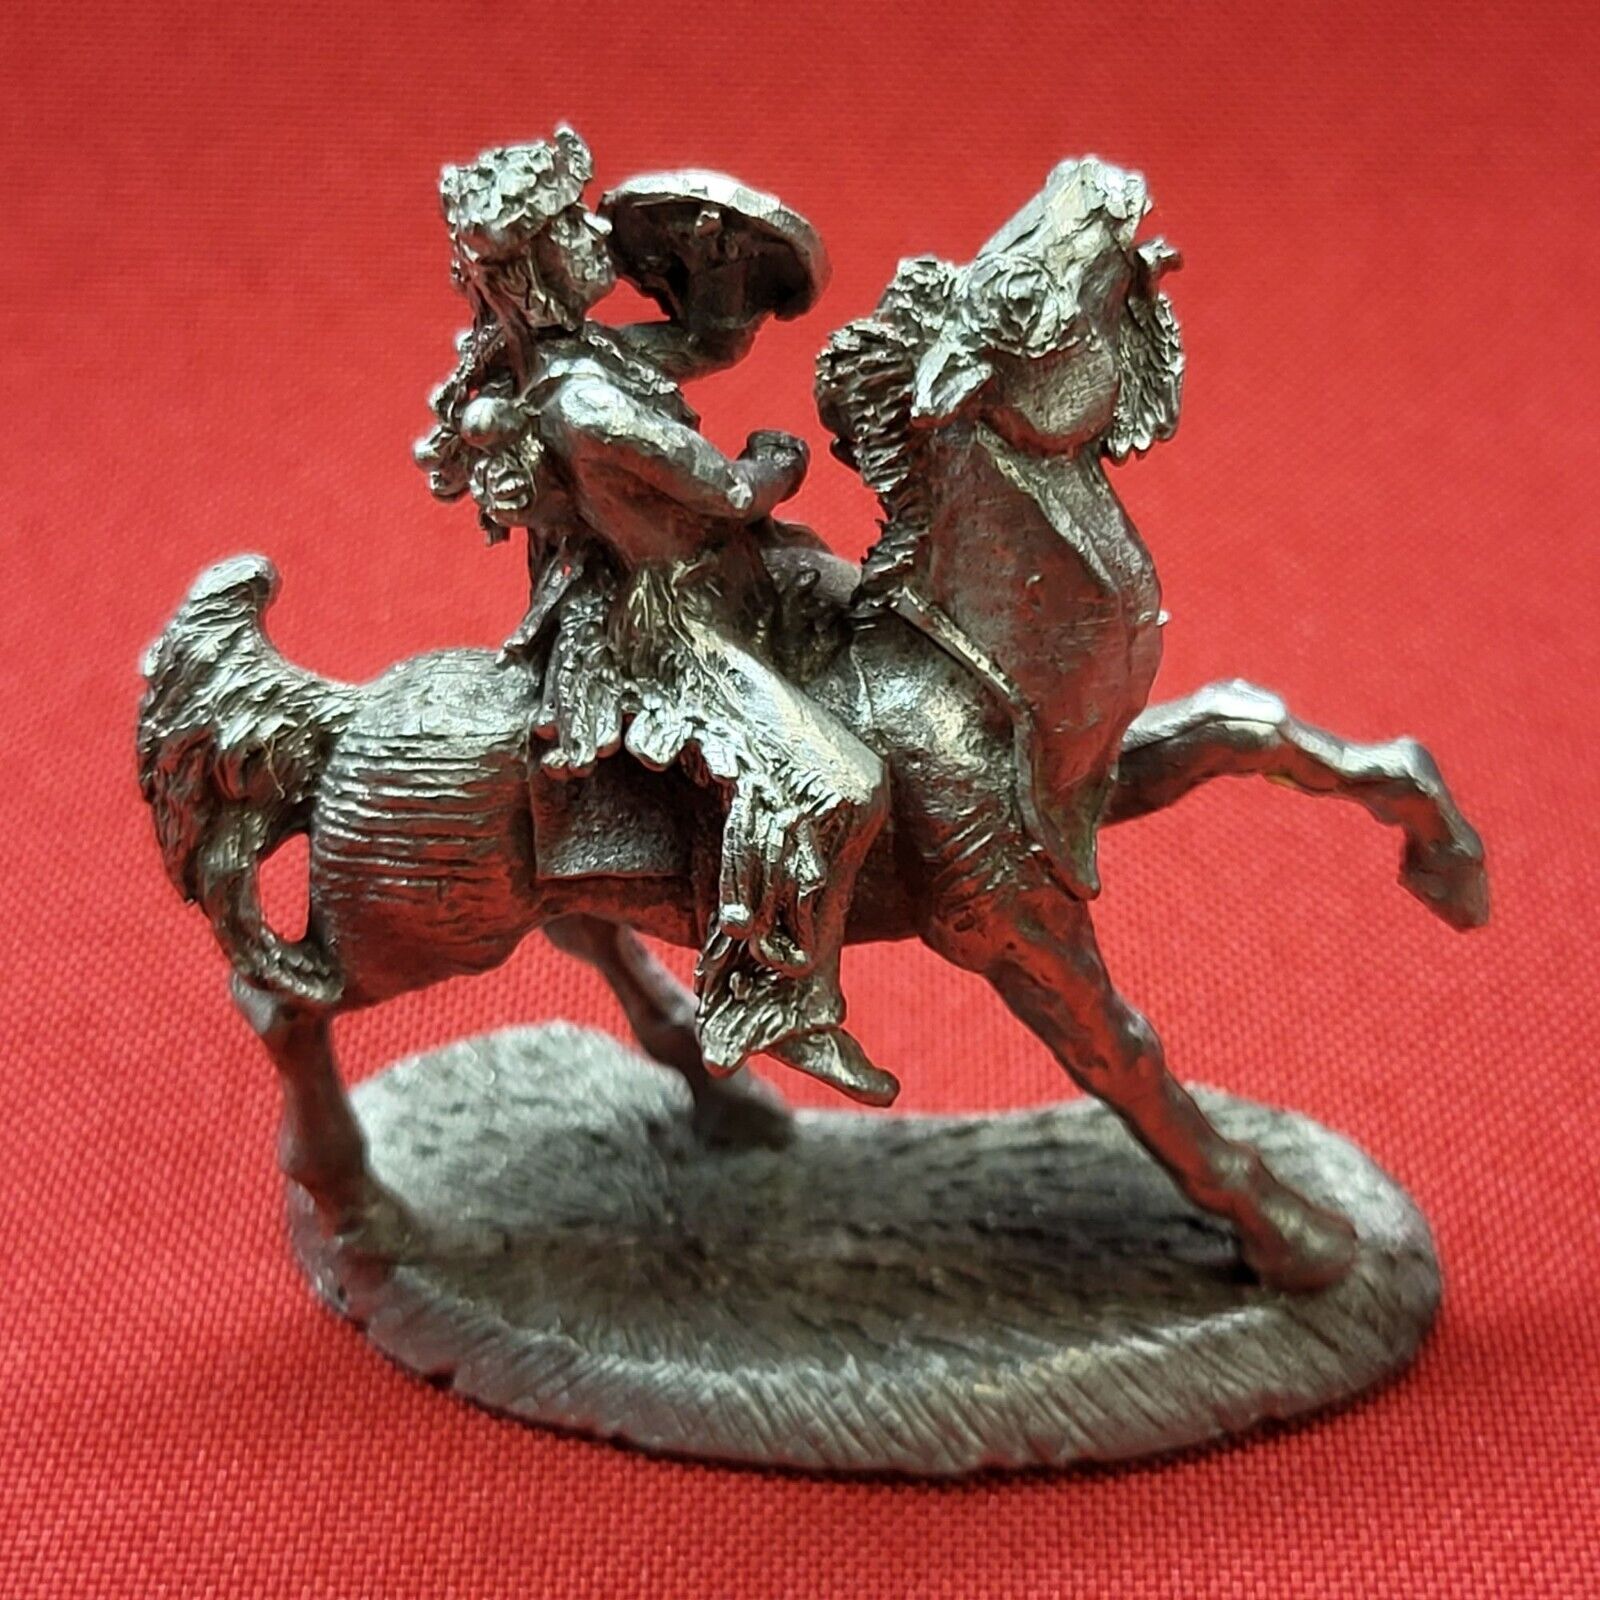 Vintage Spoontiques 3012 Pewter Miniature Indian Man on a Horse Figure